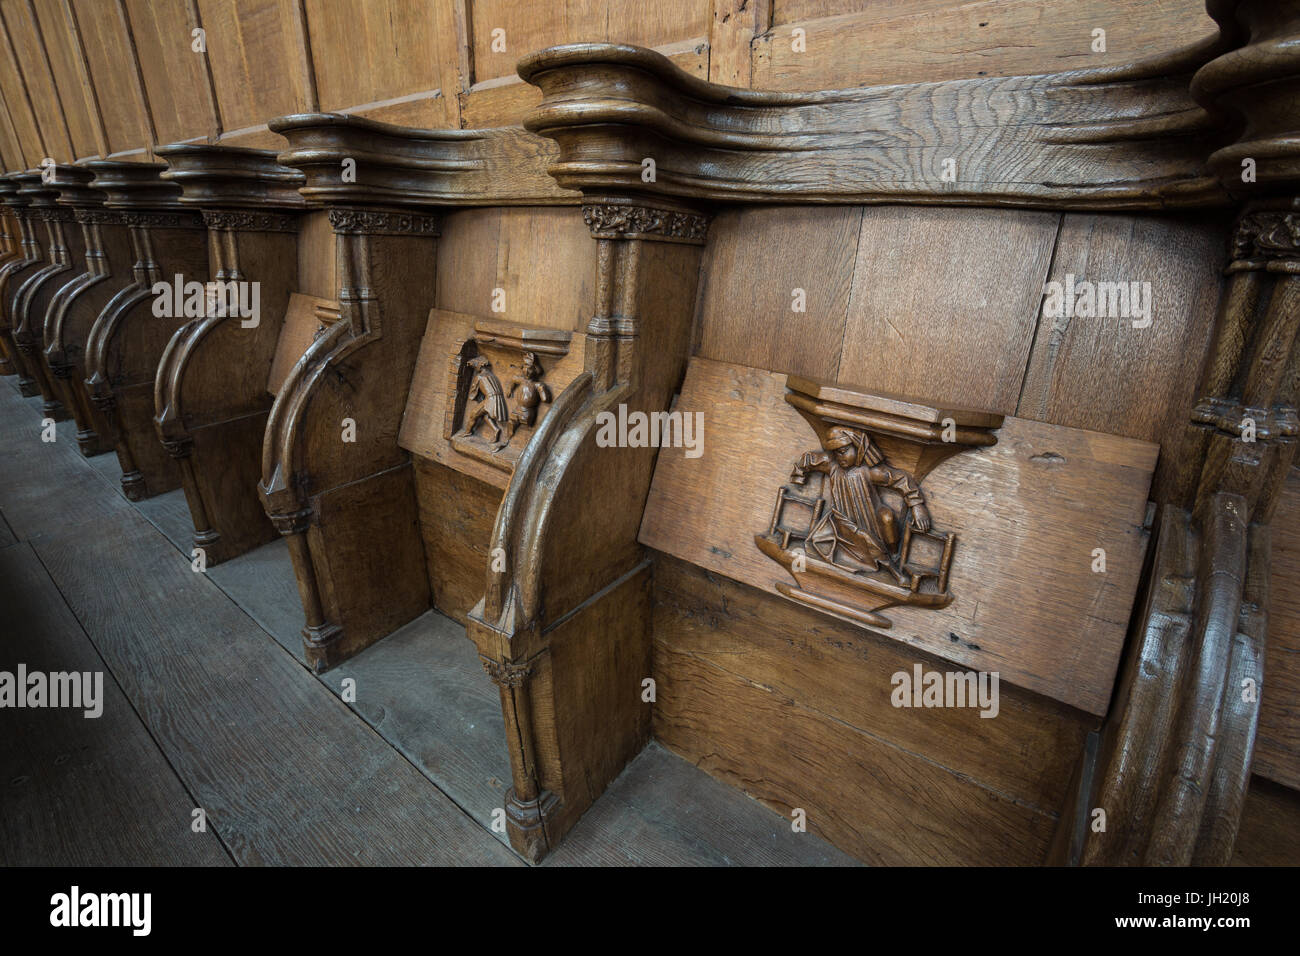 OLD CHURCH OR DE OUDE KERK, AMSTERDAM, THE NETHERLANDS - JULI 7, 2017: Old wooden misericords. Stock Photo